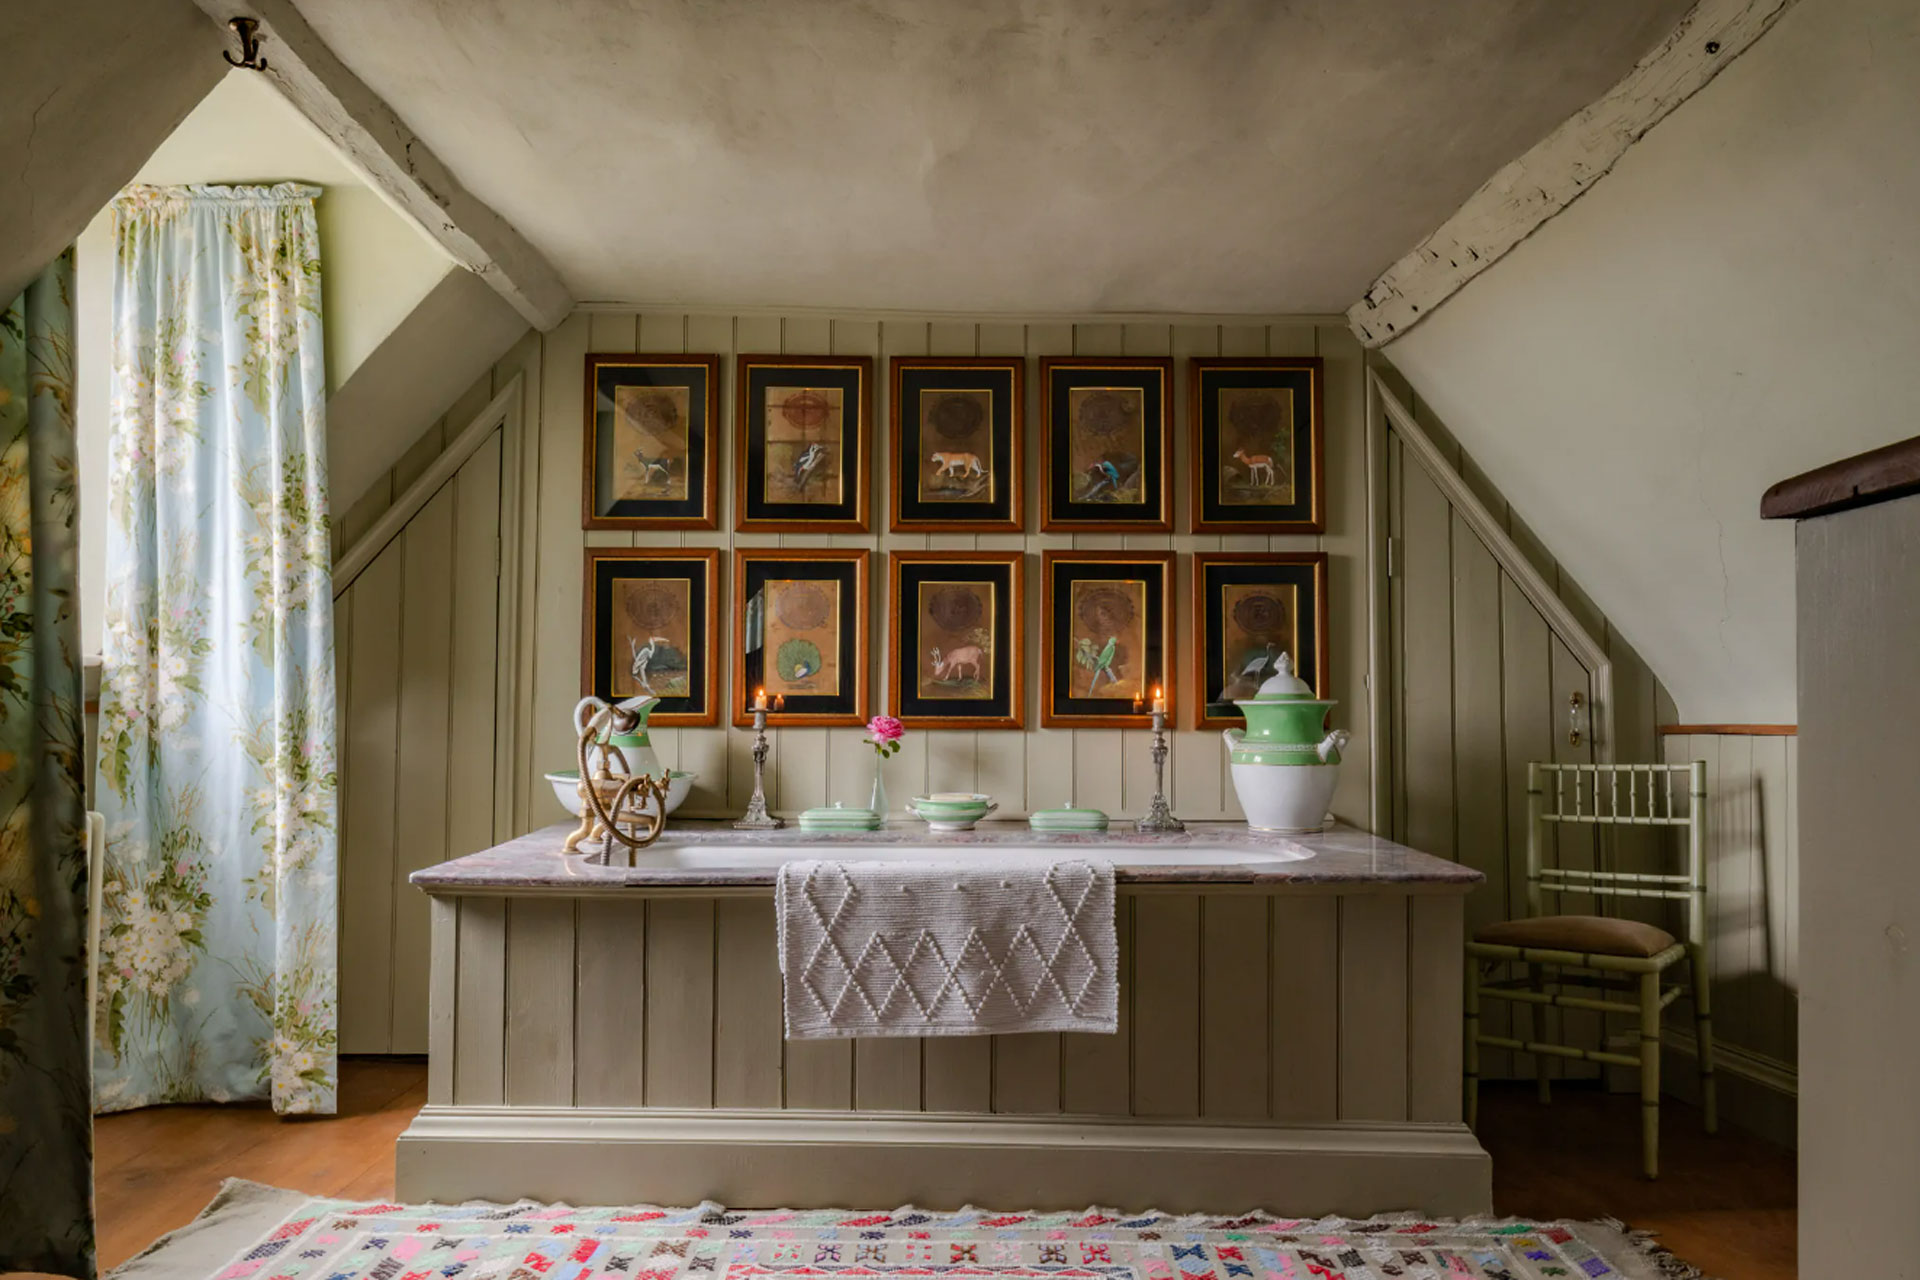 Edward Bulmer Paint used in a bathroom with wood panelling that's been painted a light sage green